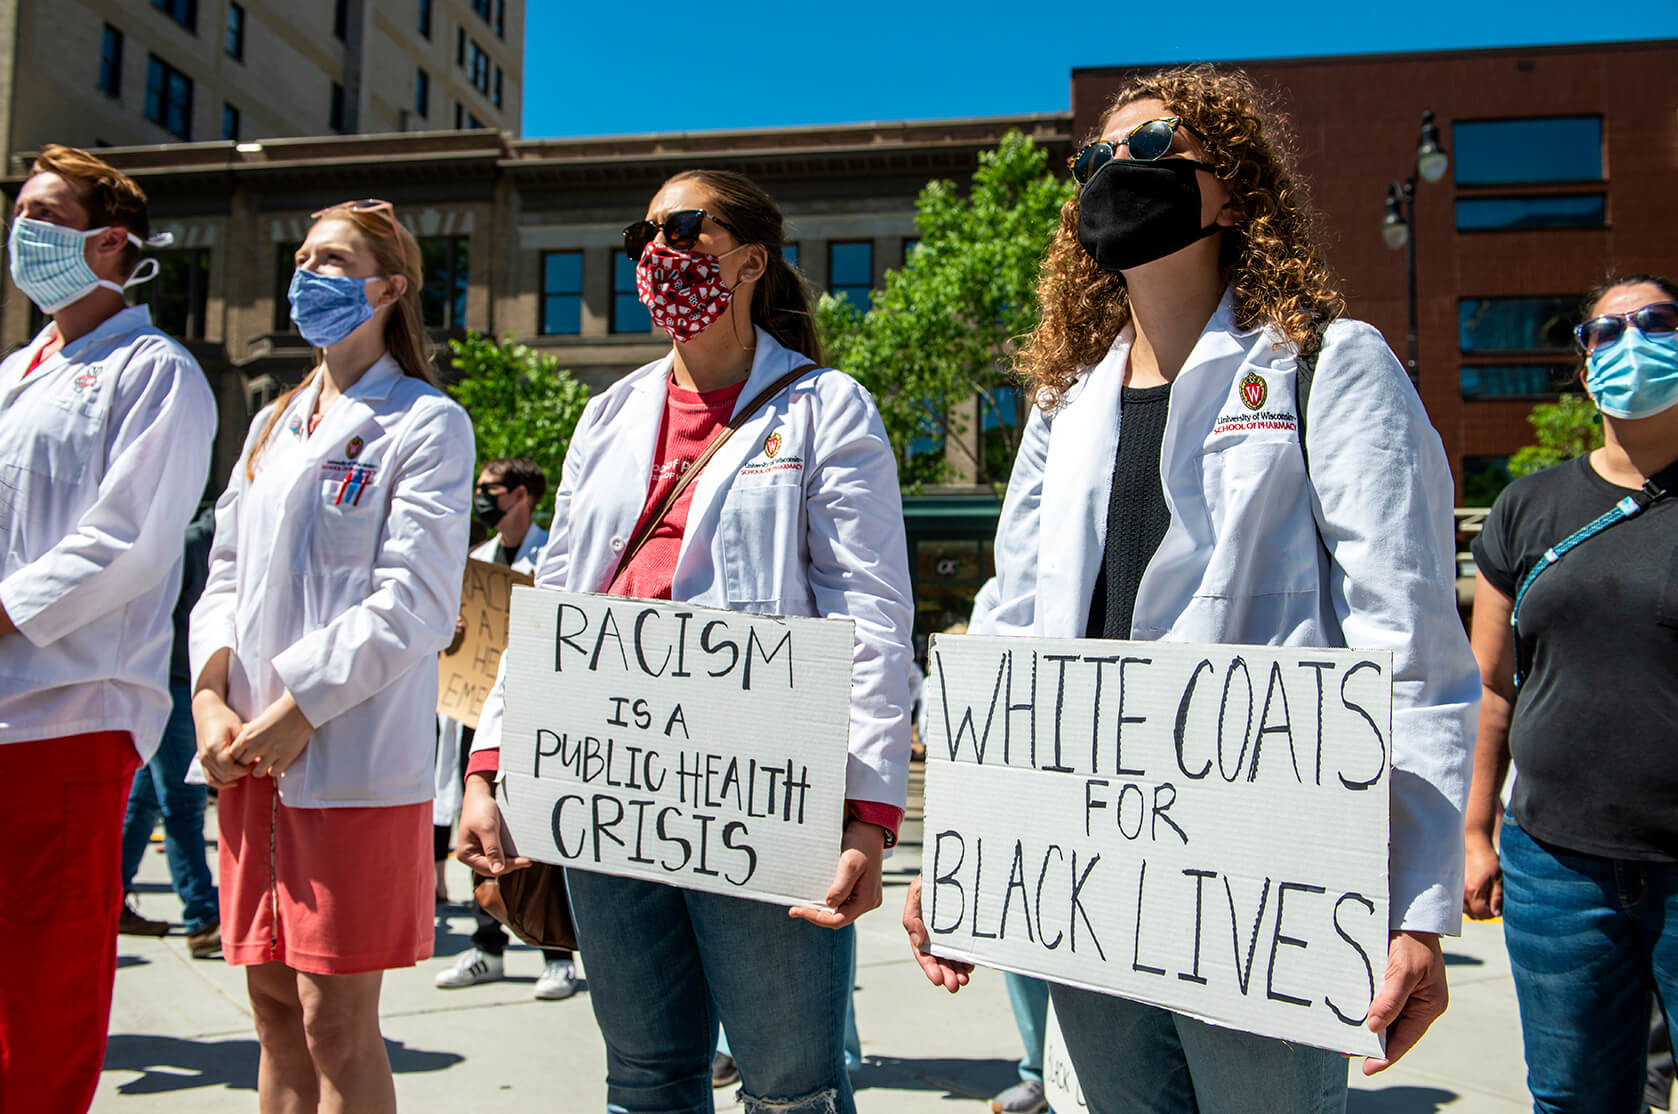 Students holding signs during white coats for black lives march